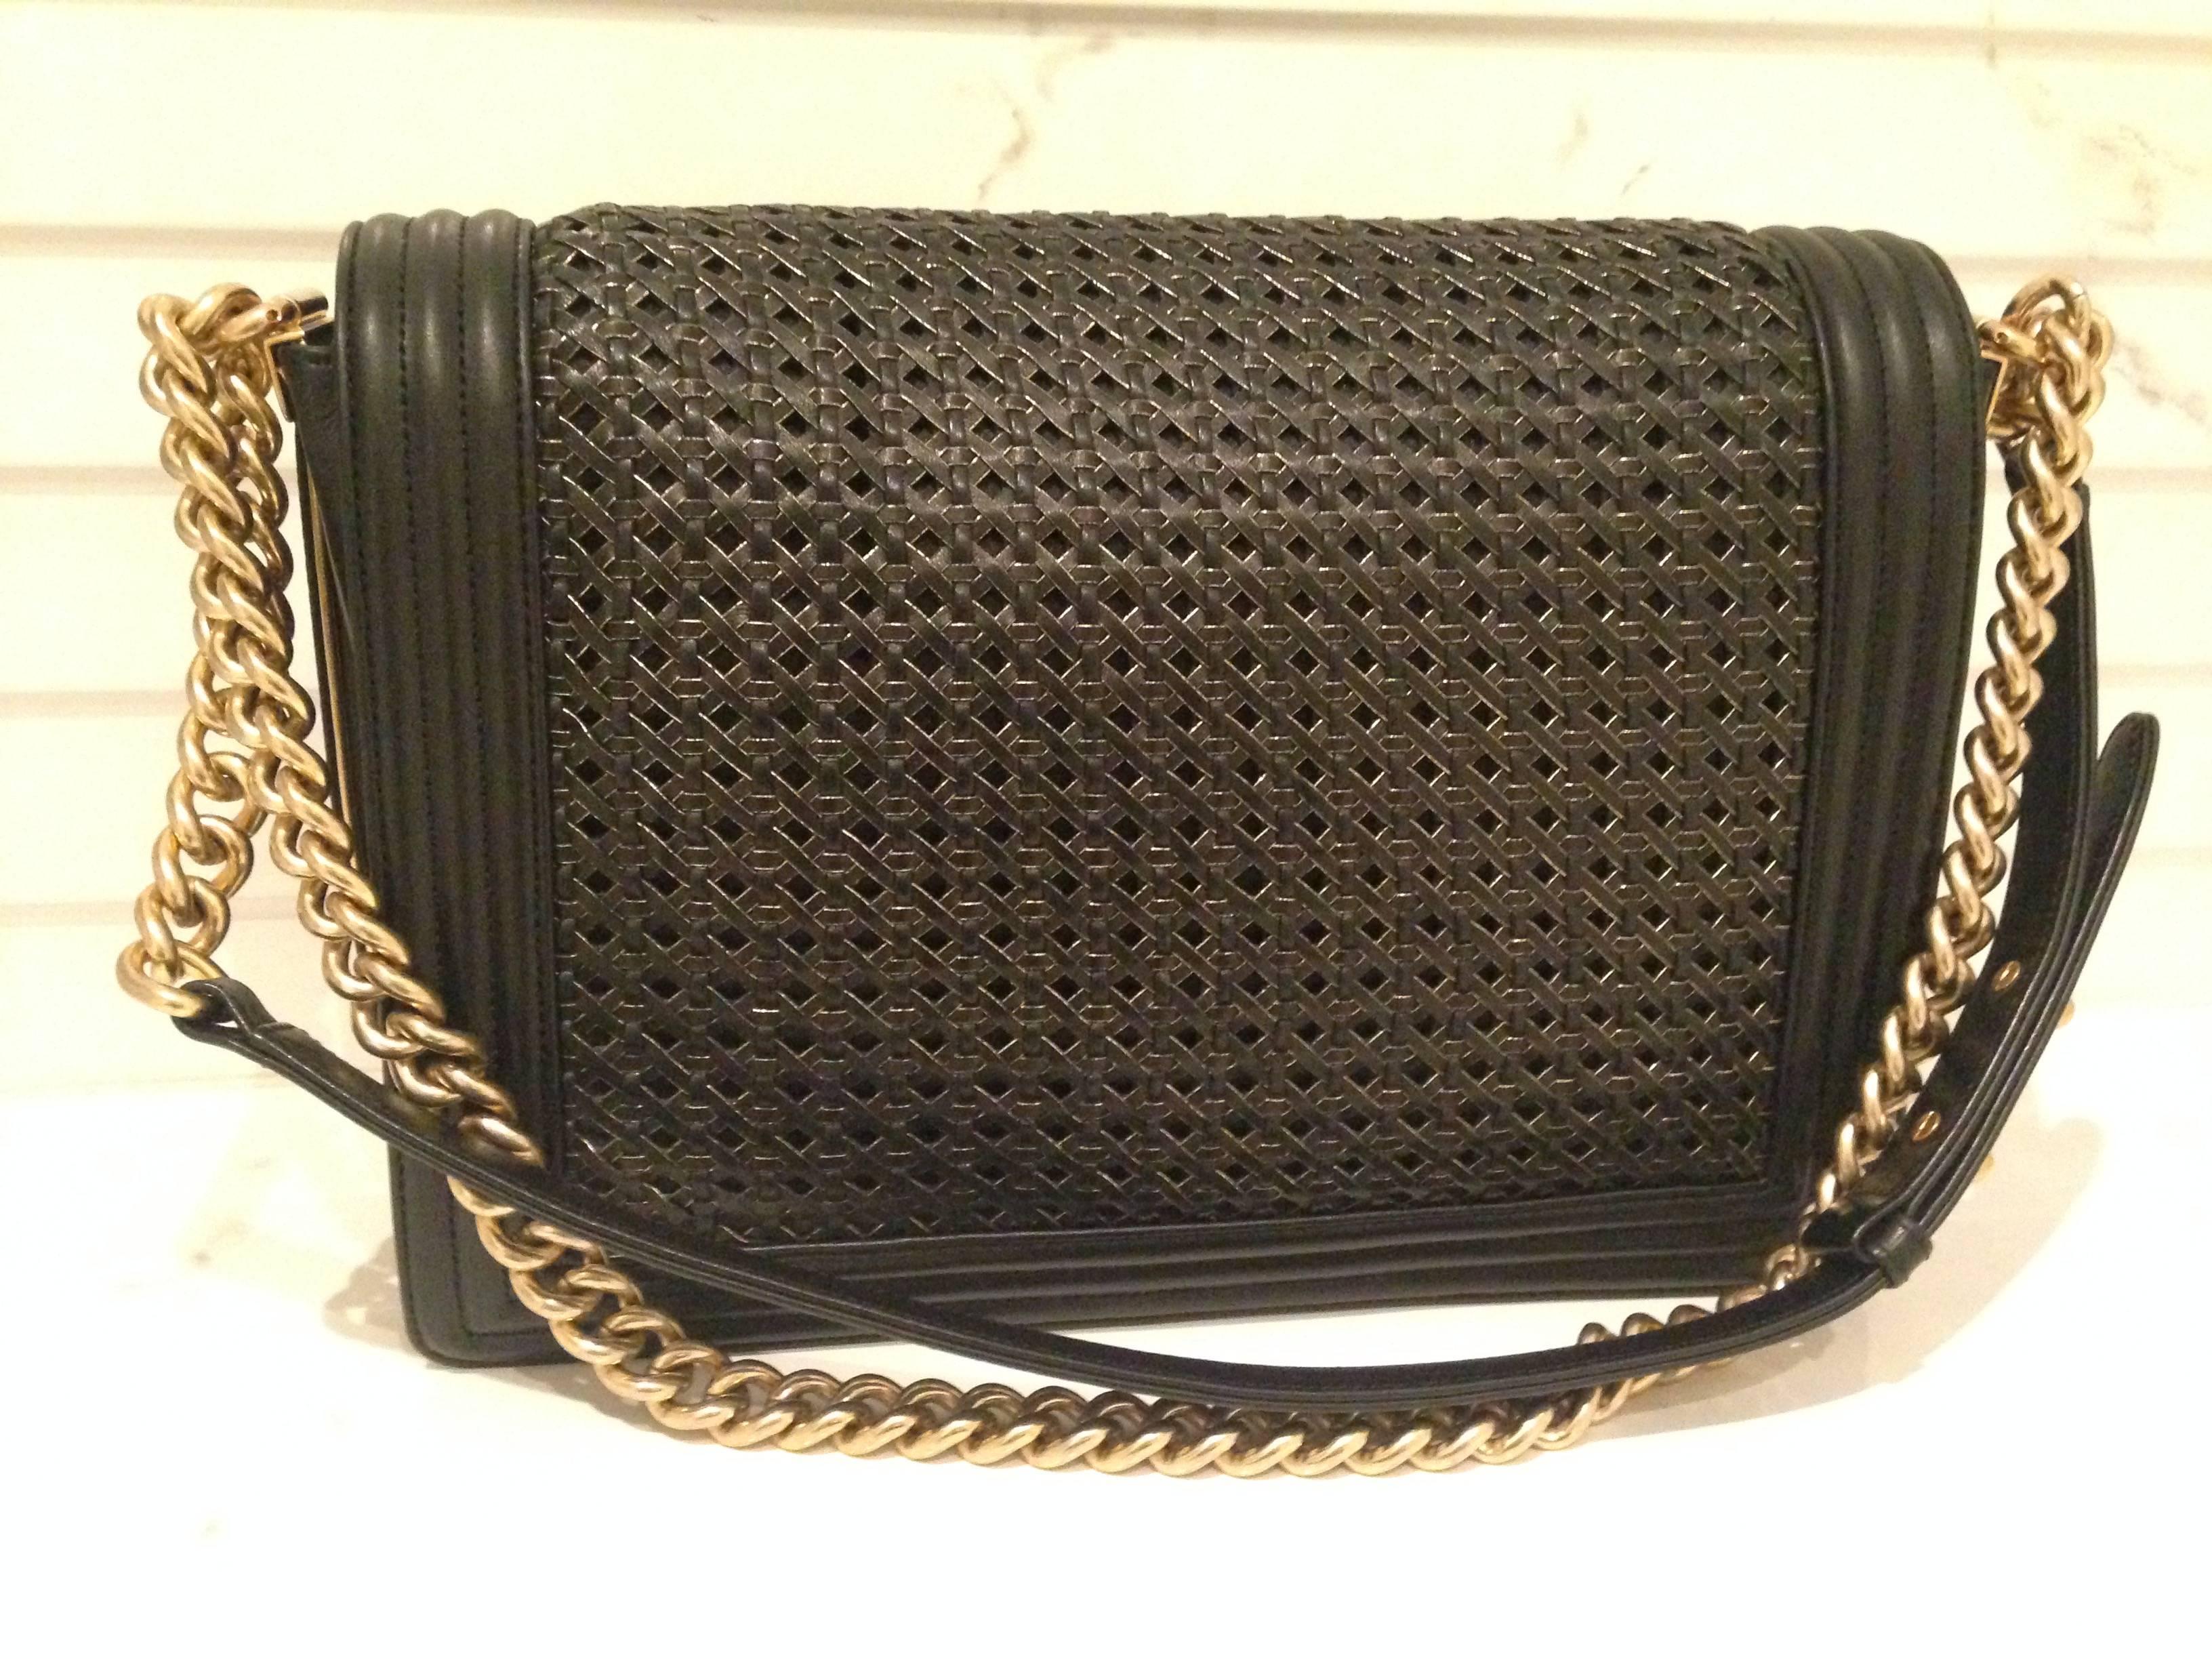 Really nice Chanel Boy bag in black and golden leather.

Used but in really good condition.

Size 30x22x10 cm